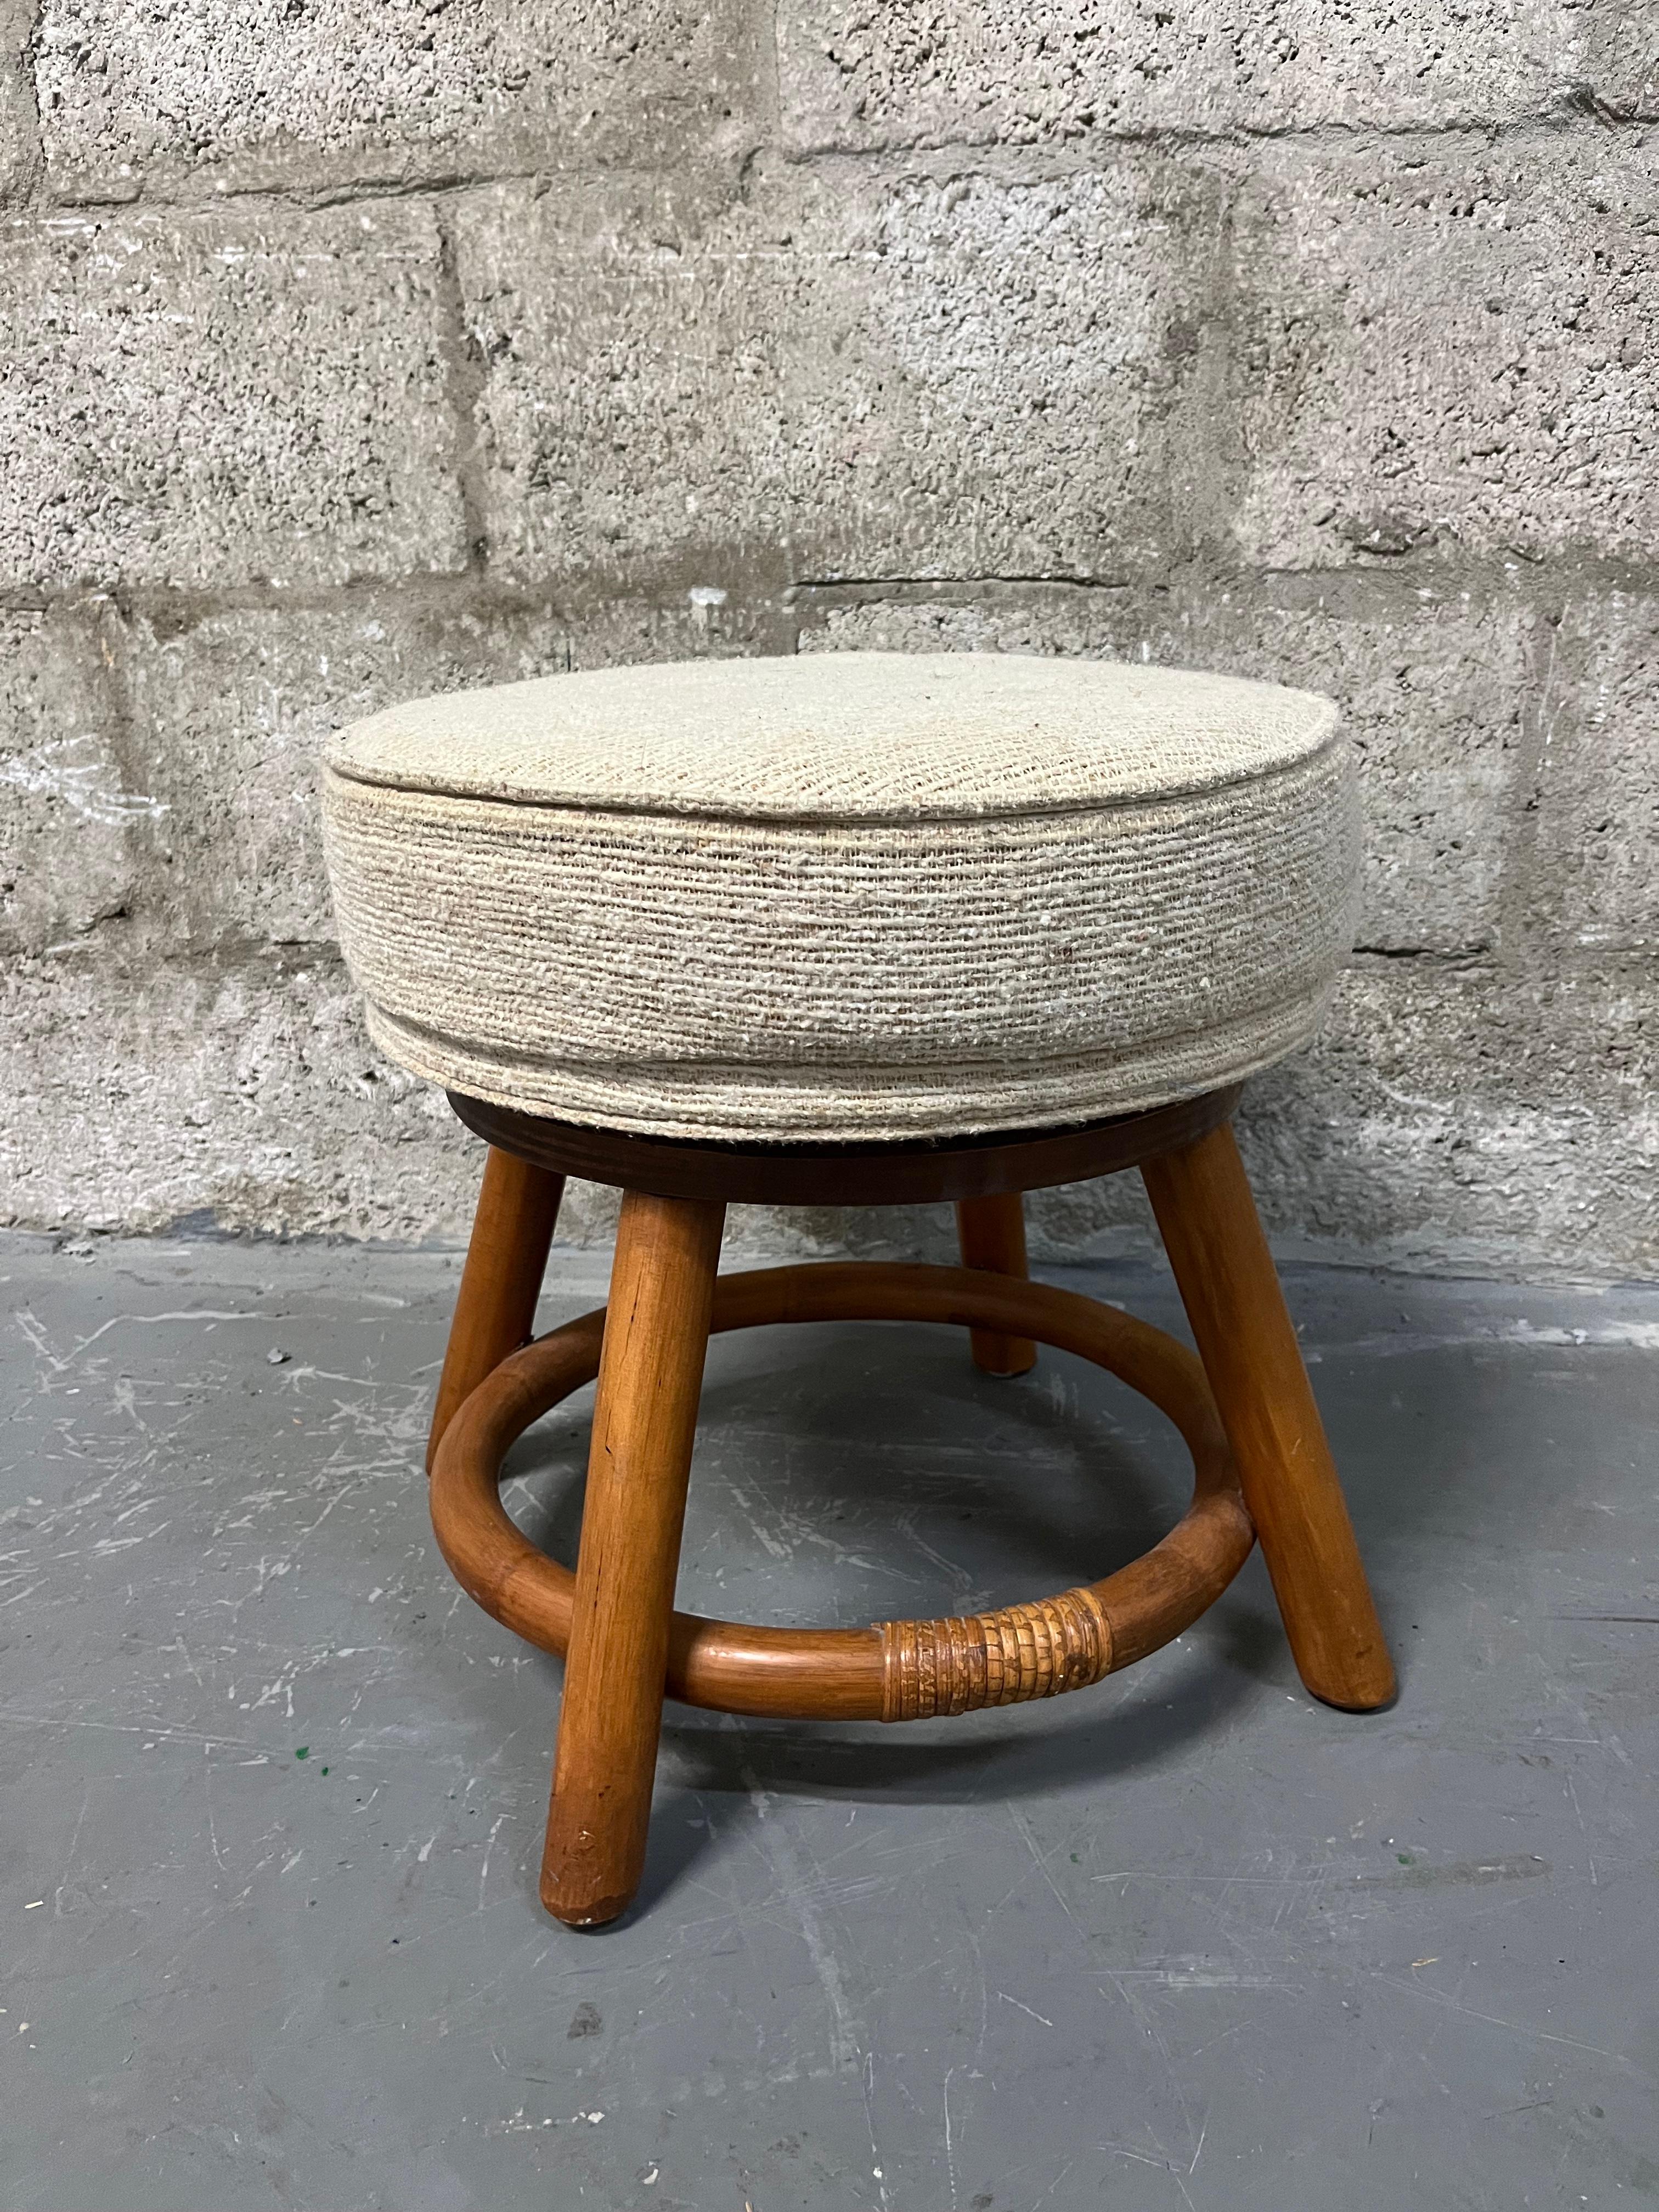 Vintage Bamboo Rattan Wicker Swivel Footstool /Ottoman in the Paul Frankl's Style by Classic Rattan Inc. Circa 1970s
Features a swivel cushion with the original cream upholstery and a Boho Chic style rattan frame.
In Good Original Condition with